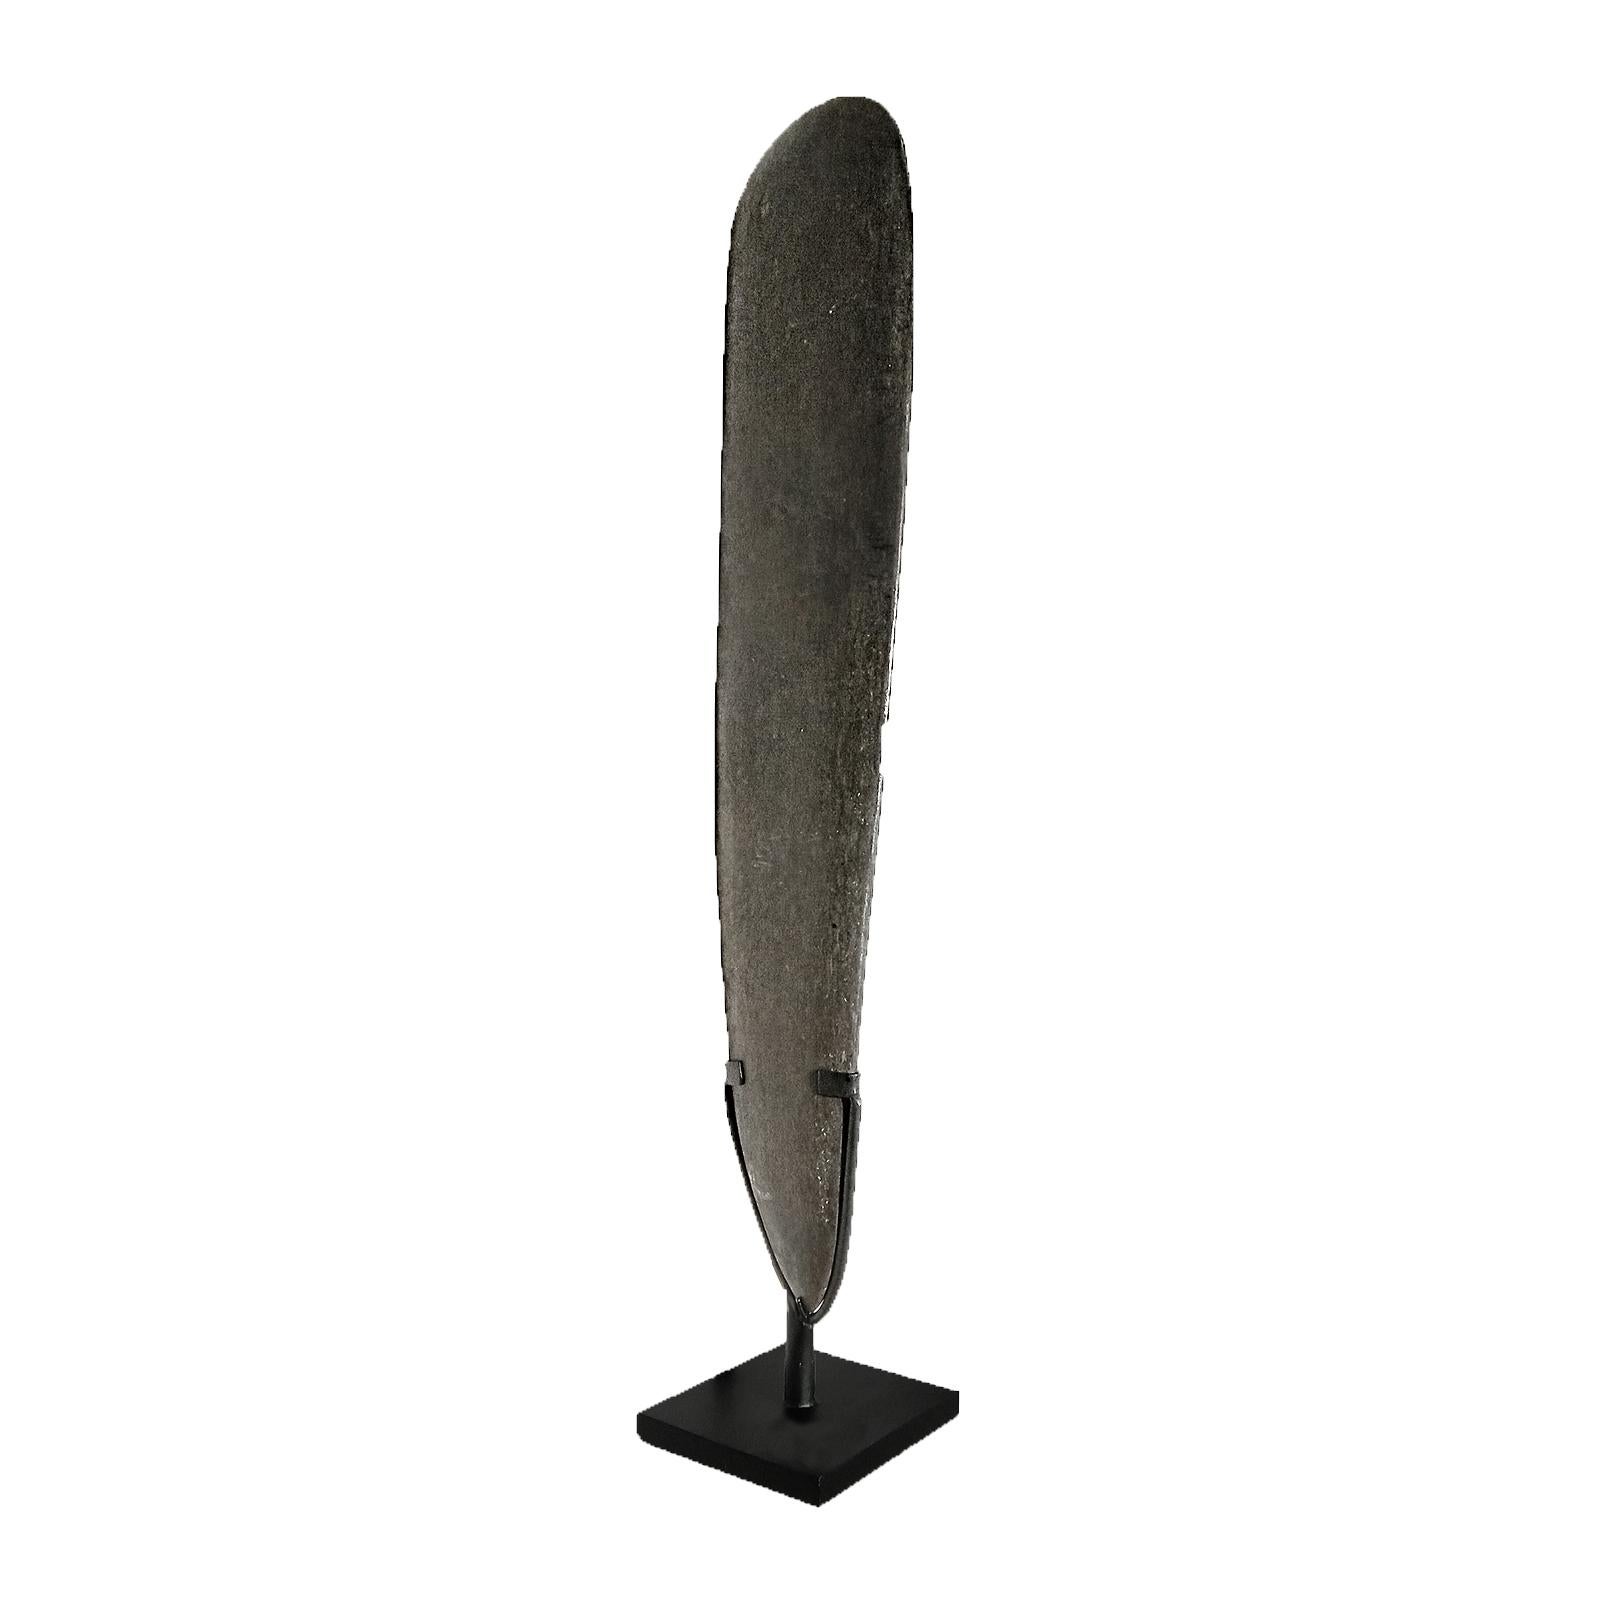 A hand-carved, hand-polished volcanic Basalt blade from Indonesia, late 20th Century. Mounted on a black metal stand. 

34 inches high, 6.5 inches max. wide. Base stand: 5.75